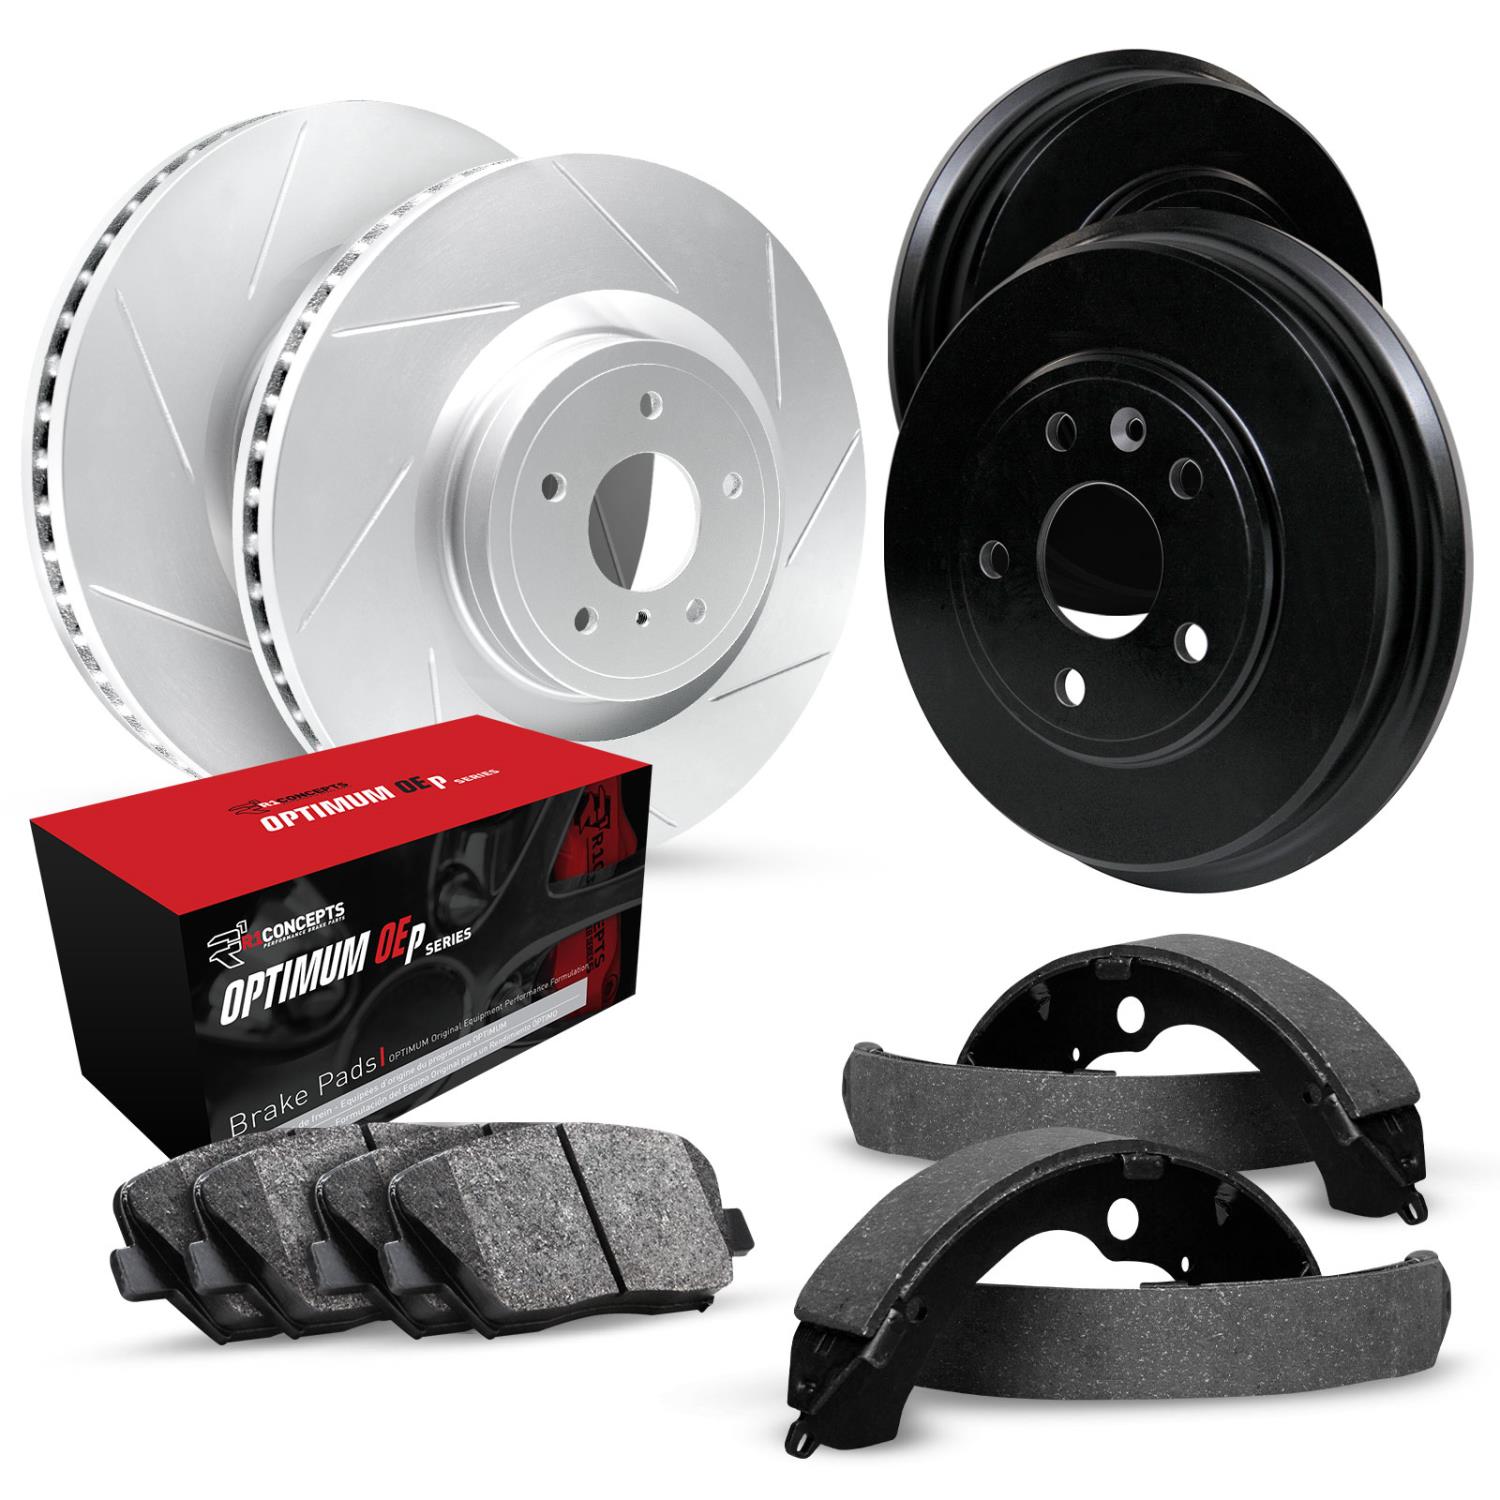 GEO-Carbon Slotted Brake Rotor & Drum Set w/Optimum OE Pads & Shoes, 2003-2008 Lexus/Toyota/Scion, Position: Front & Rear